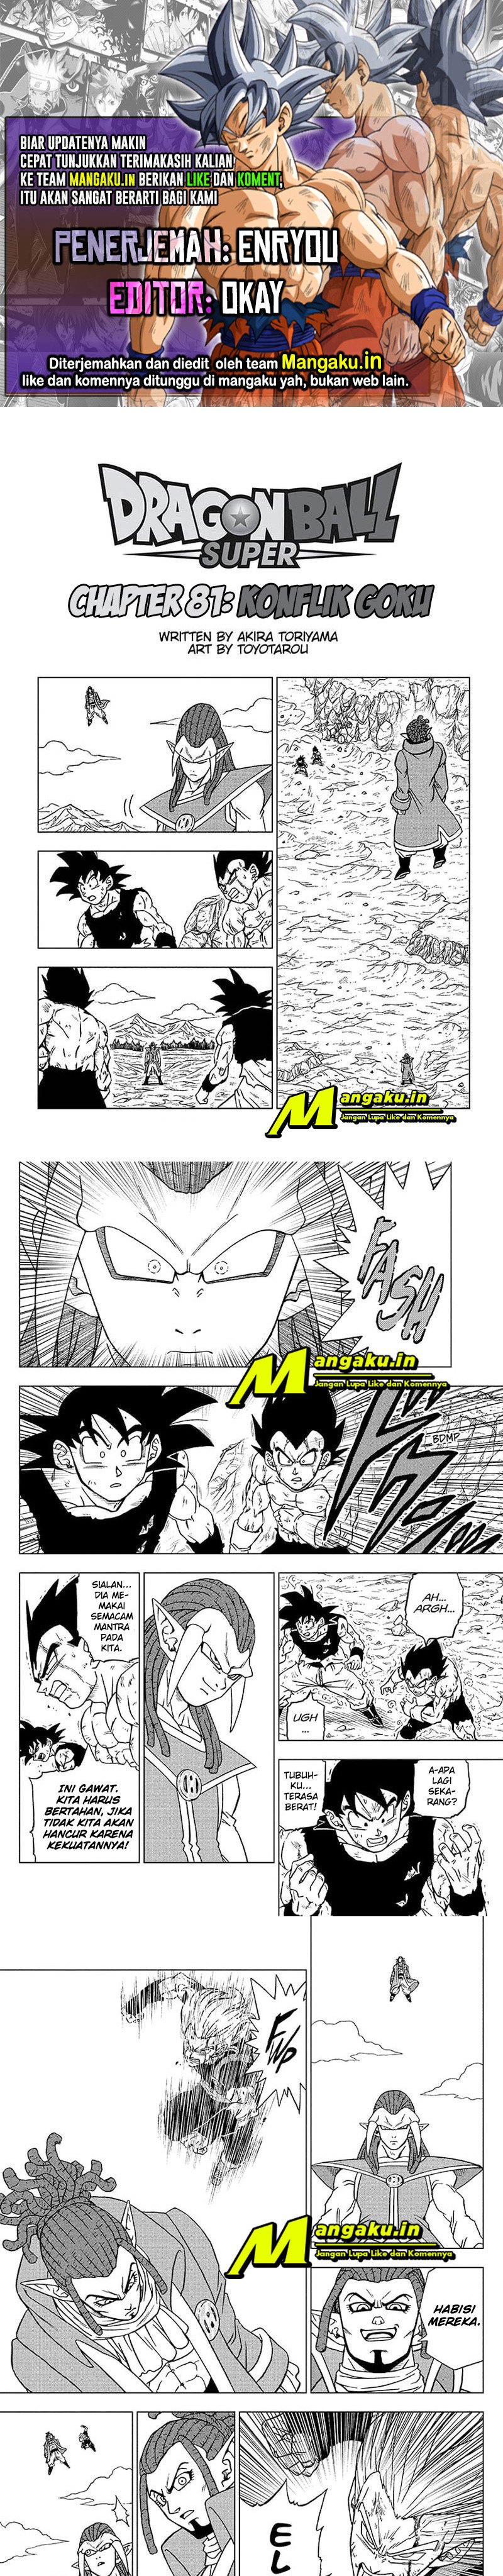 Dragon Ball Super: Chapter 81.1 - Page 1